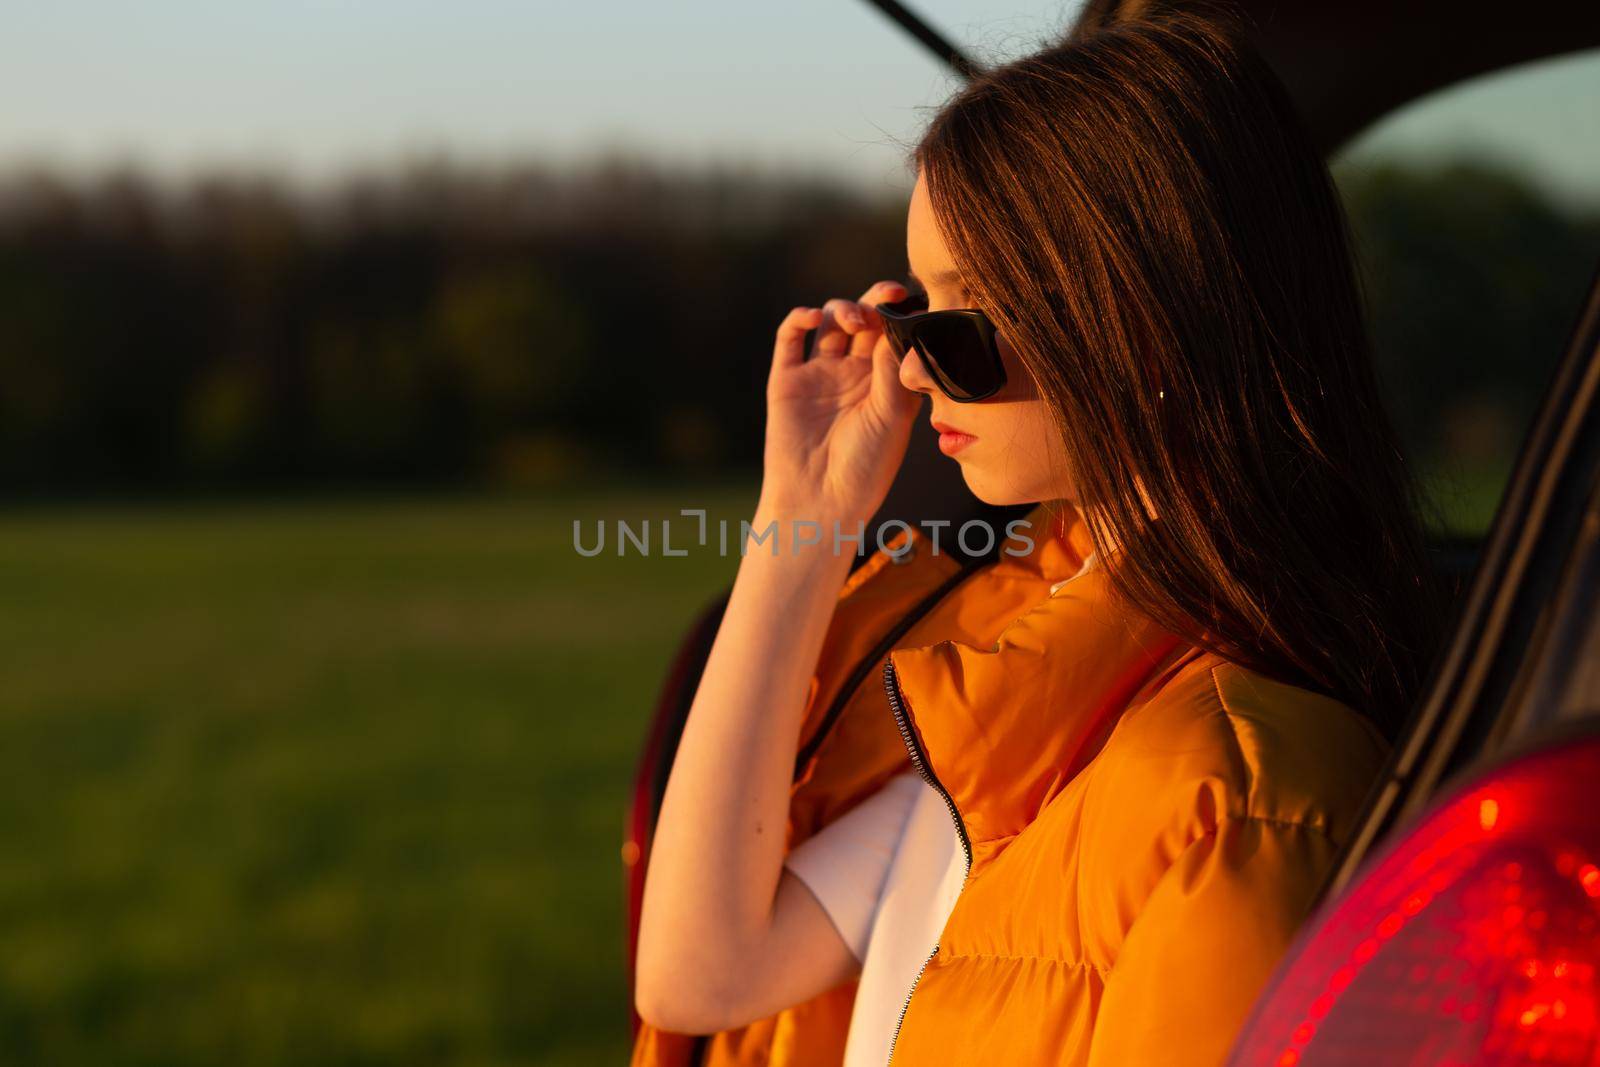 Pretty sad teenage girl with sun glasses sitting alone in a car trunk. Car travel concept.